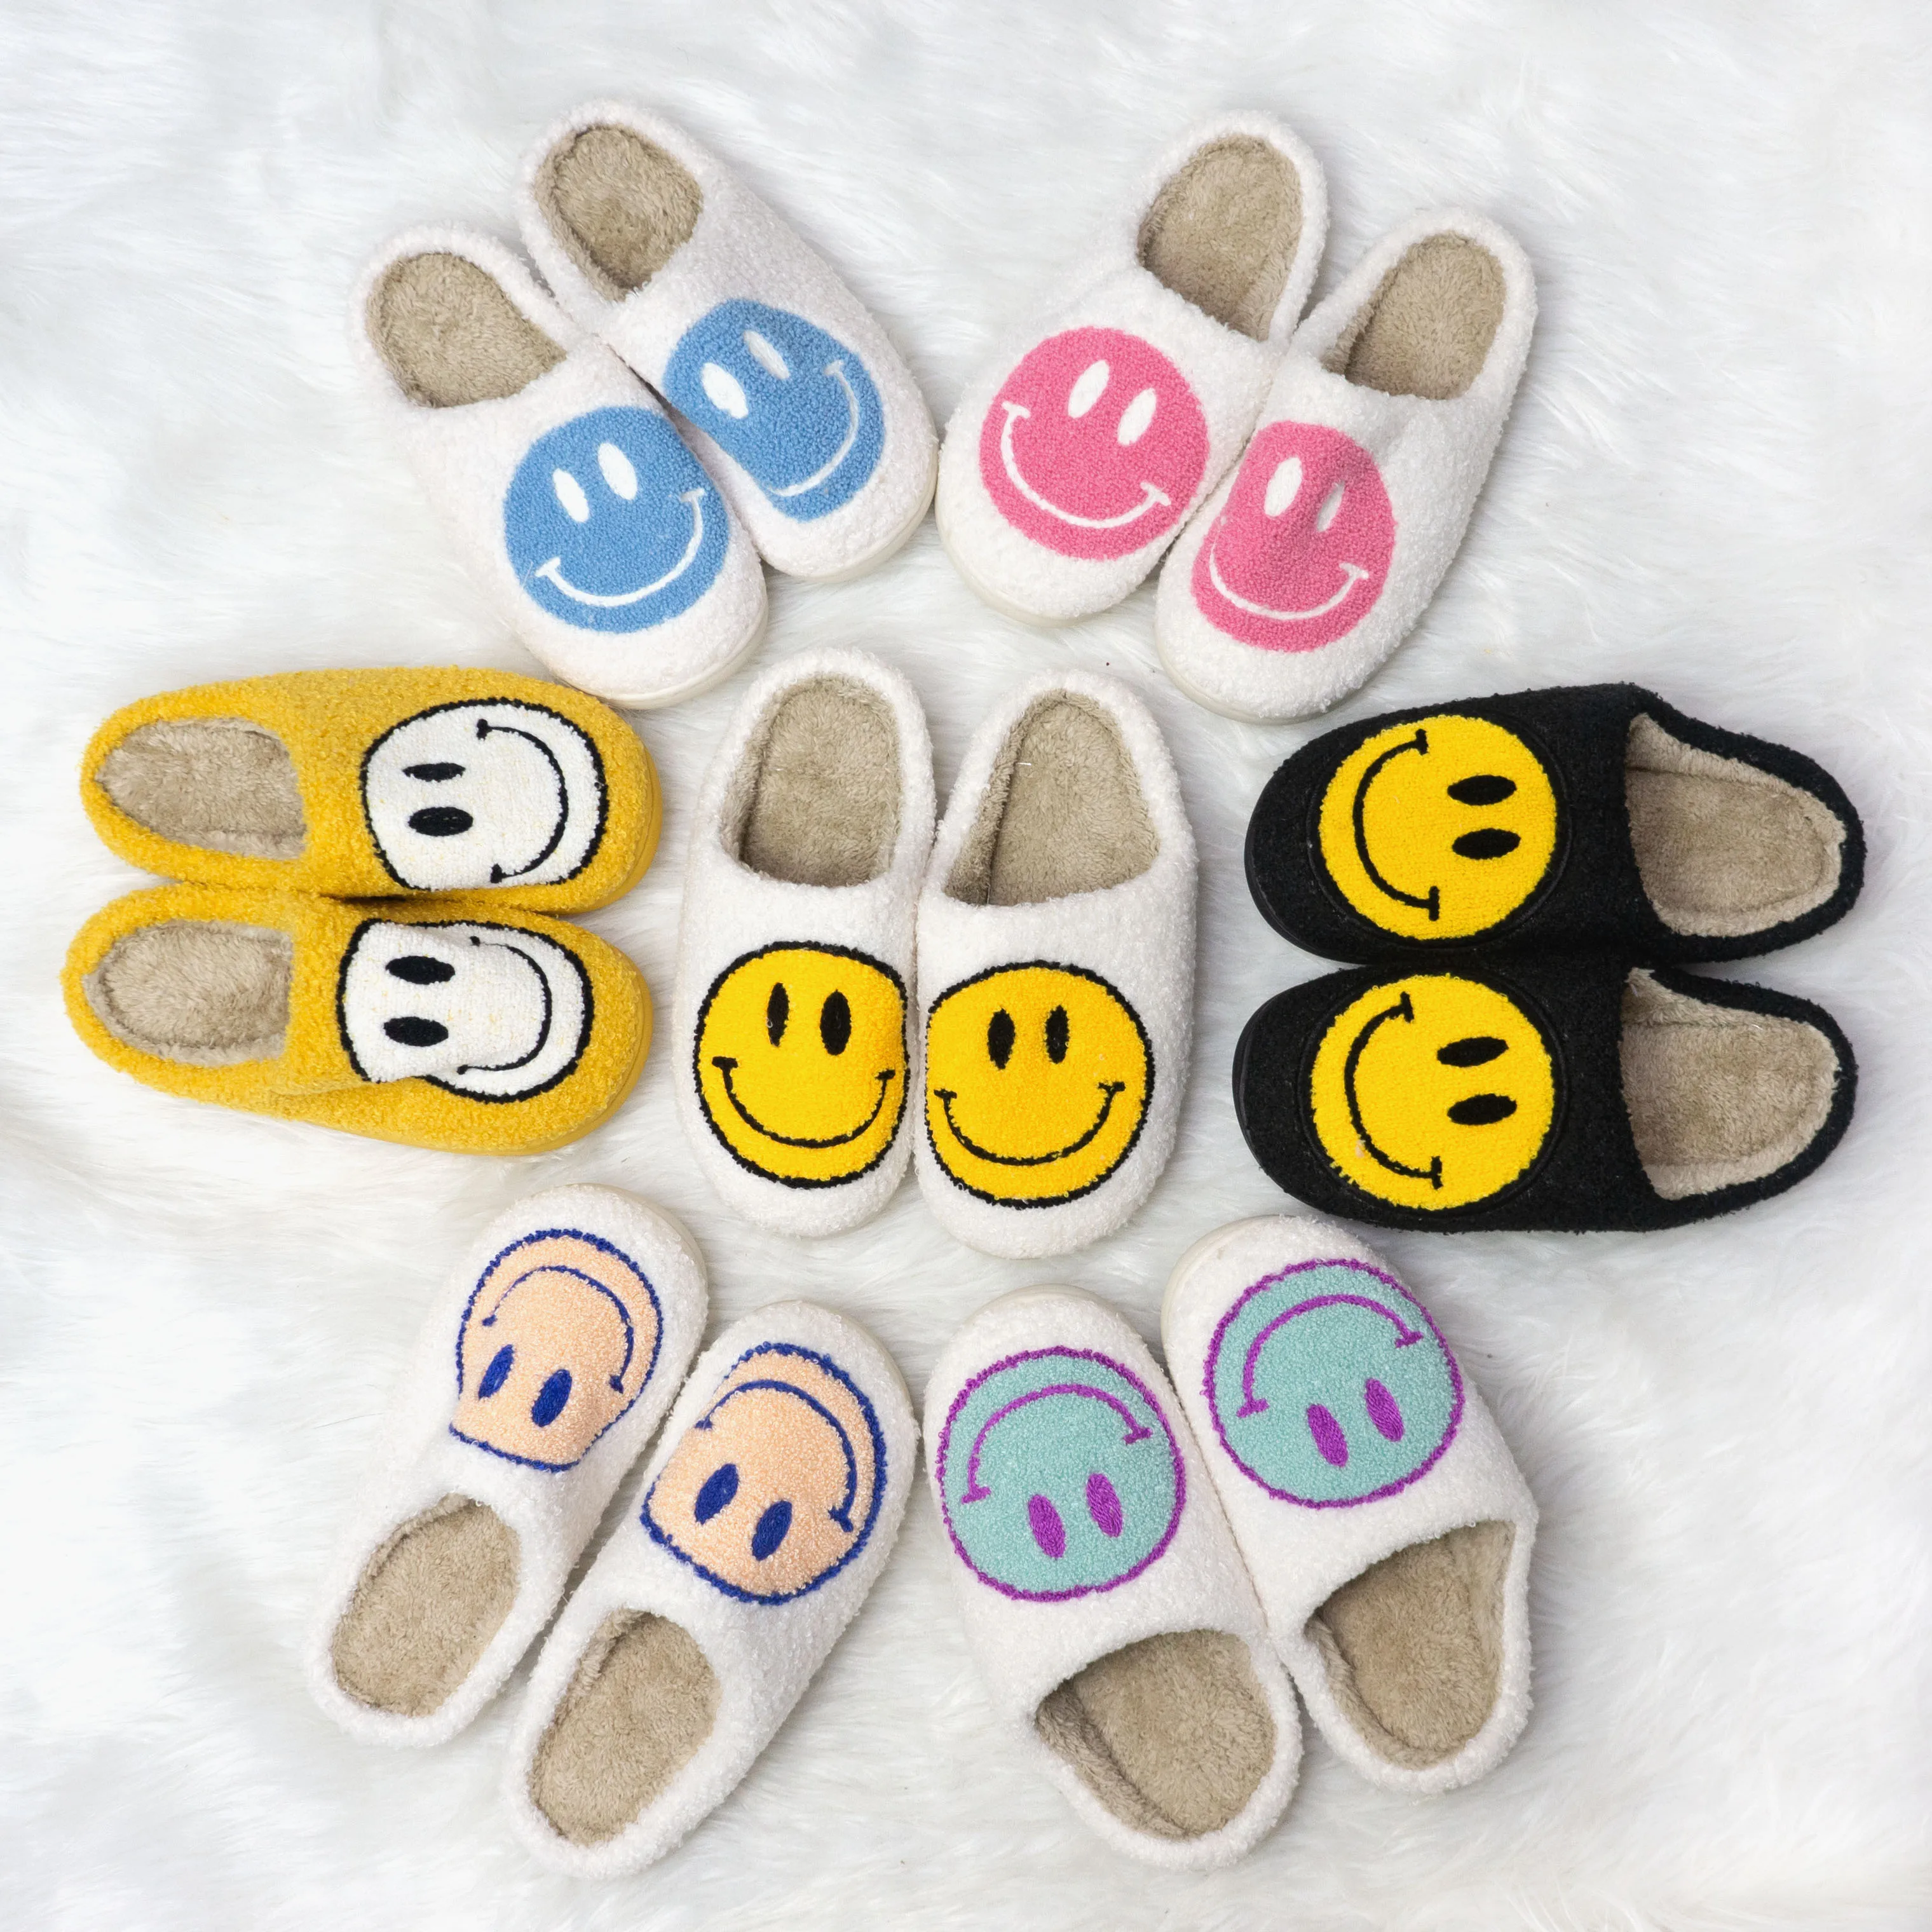 

Wholesale smiley face ladies winter indoor fuzzy happy slides warm furry home house cute bedroom smile pantoufle slippers, 7 different colors